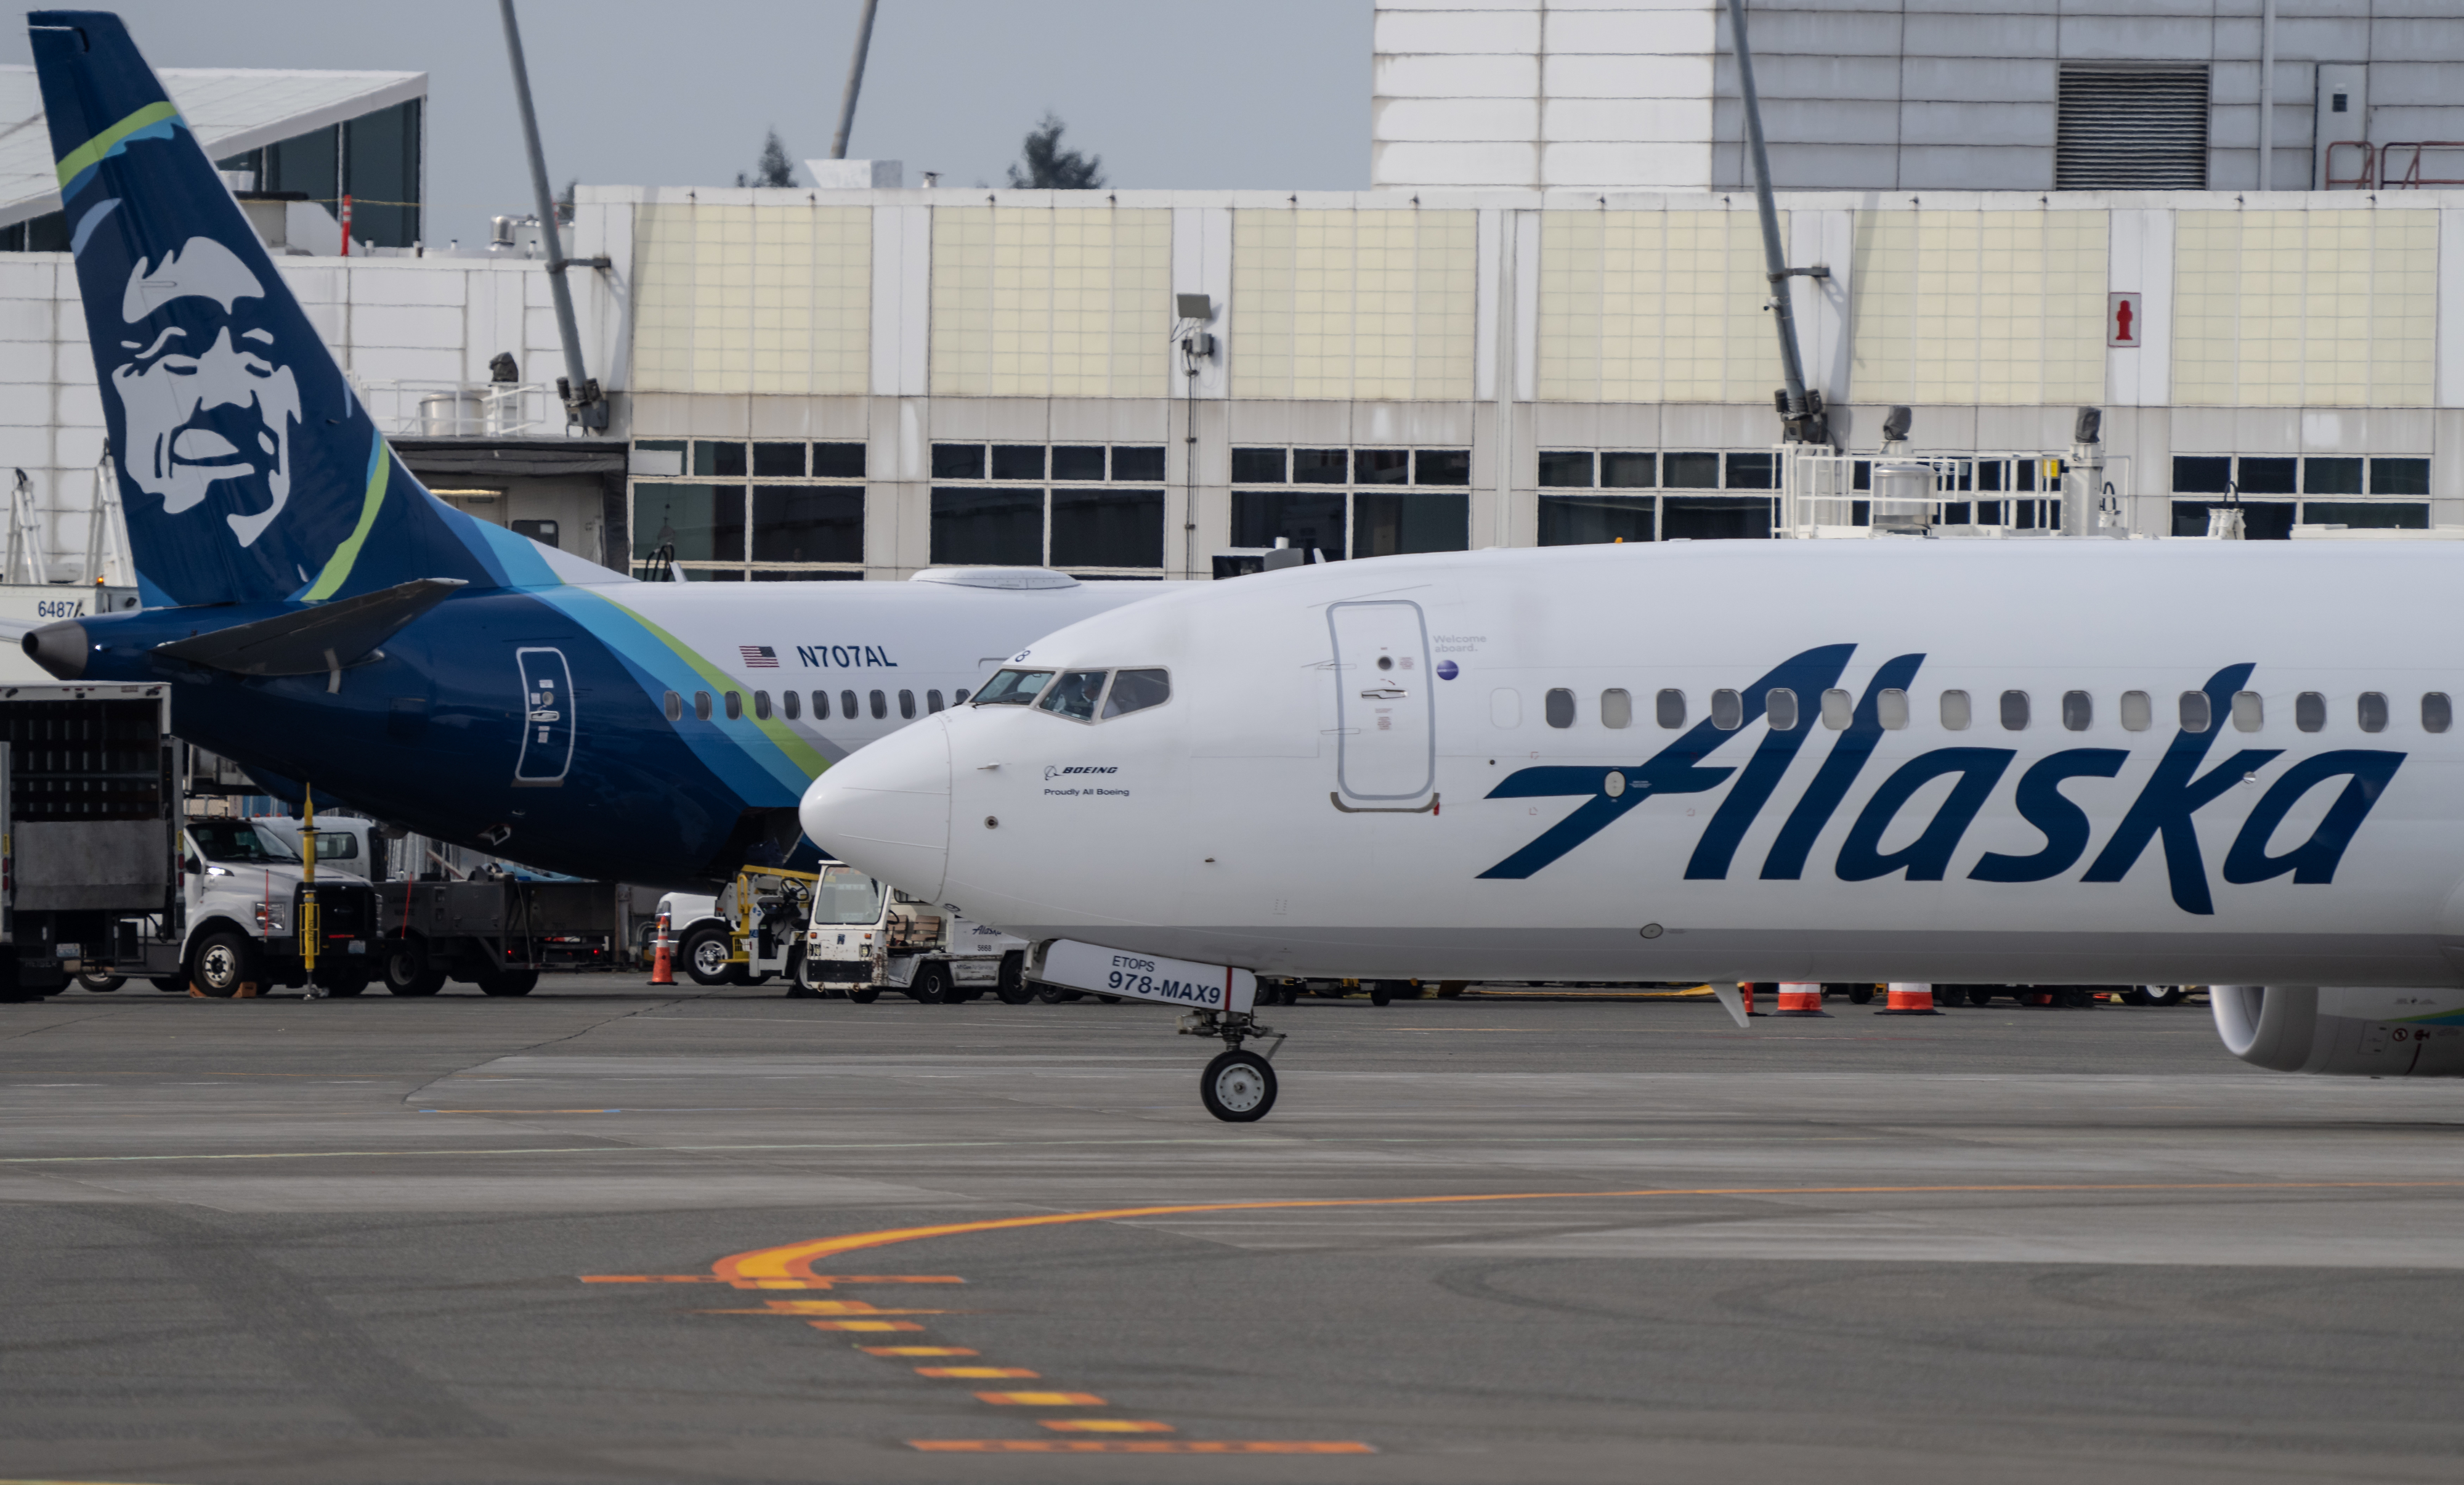 Two Alaska Airlines aircraft at an airport, with distinctive company branding on the tail and fuselage